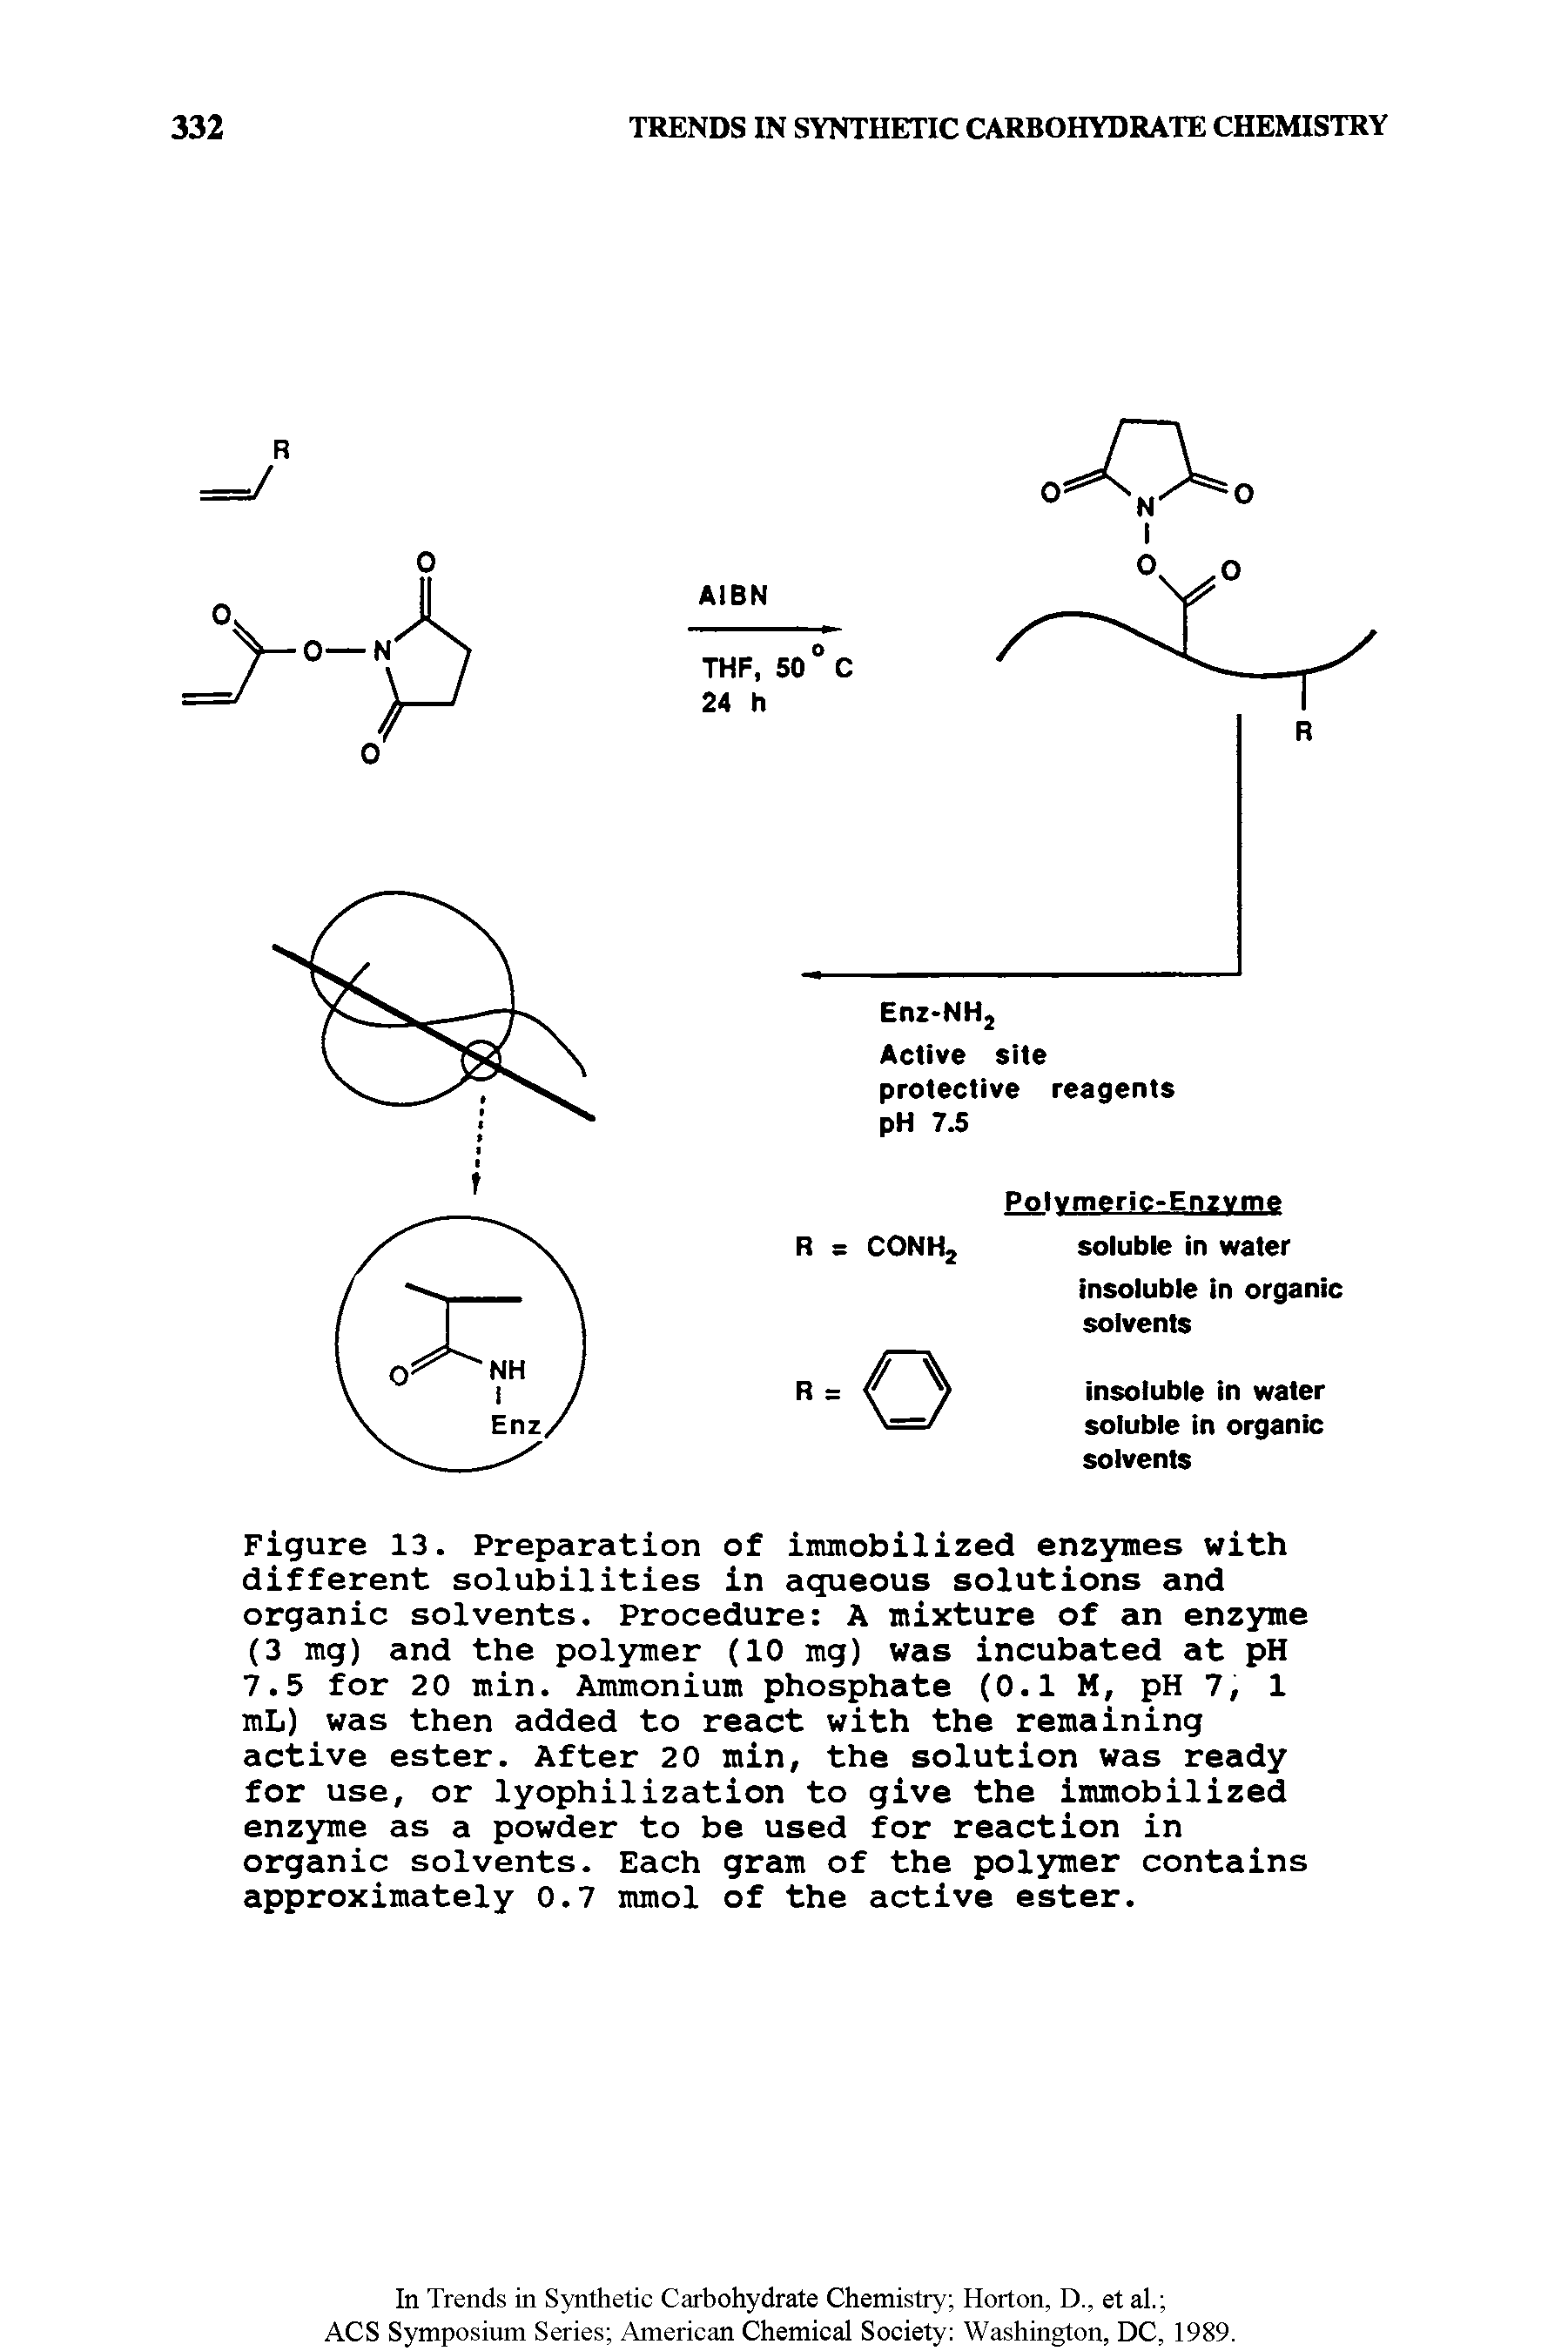 Figure 13. Preparation of immobilized enzymes with different solubilities in aqueous solutions and organic solvents. Procedure A mixture of an enzyme (3 mg) and the polymer (10 mg) was incubated at pH 7.5 for 20 min. Ammonium phosphate (0.1 M, pH 7, 1 mL) was then added to react with the remaining active ester. After 20 min, the solution was ready for use, or lyophilization to give the immobilized enzyme as a powder to be used for reaction in organic solvents. Each gram of the polymer contains approximately 0.7 mmol of the active ester.